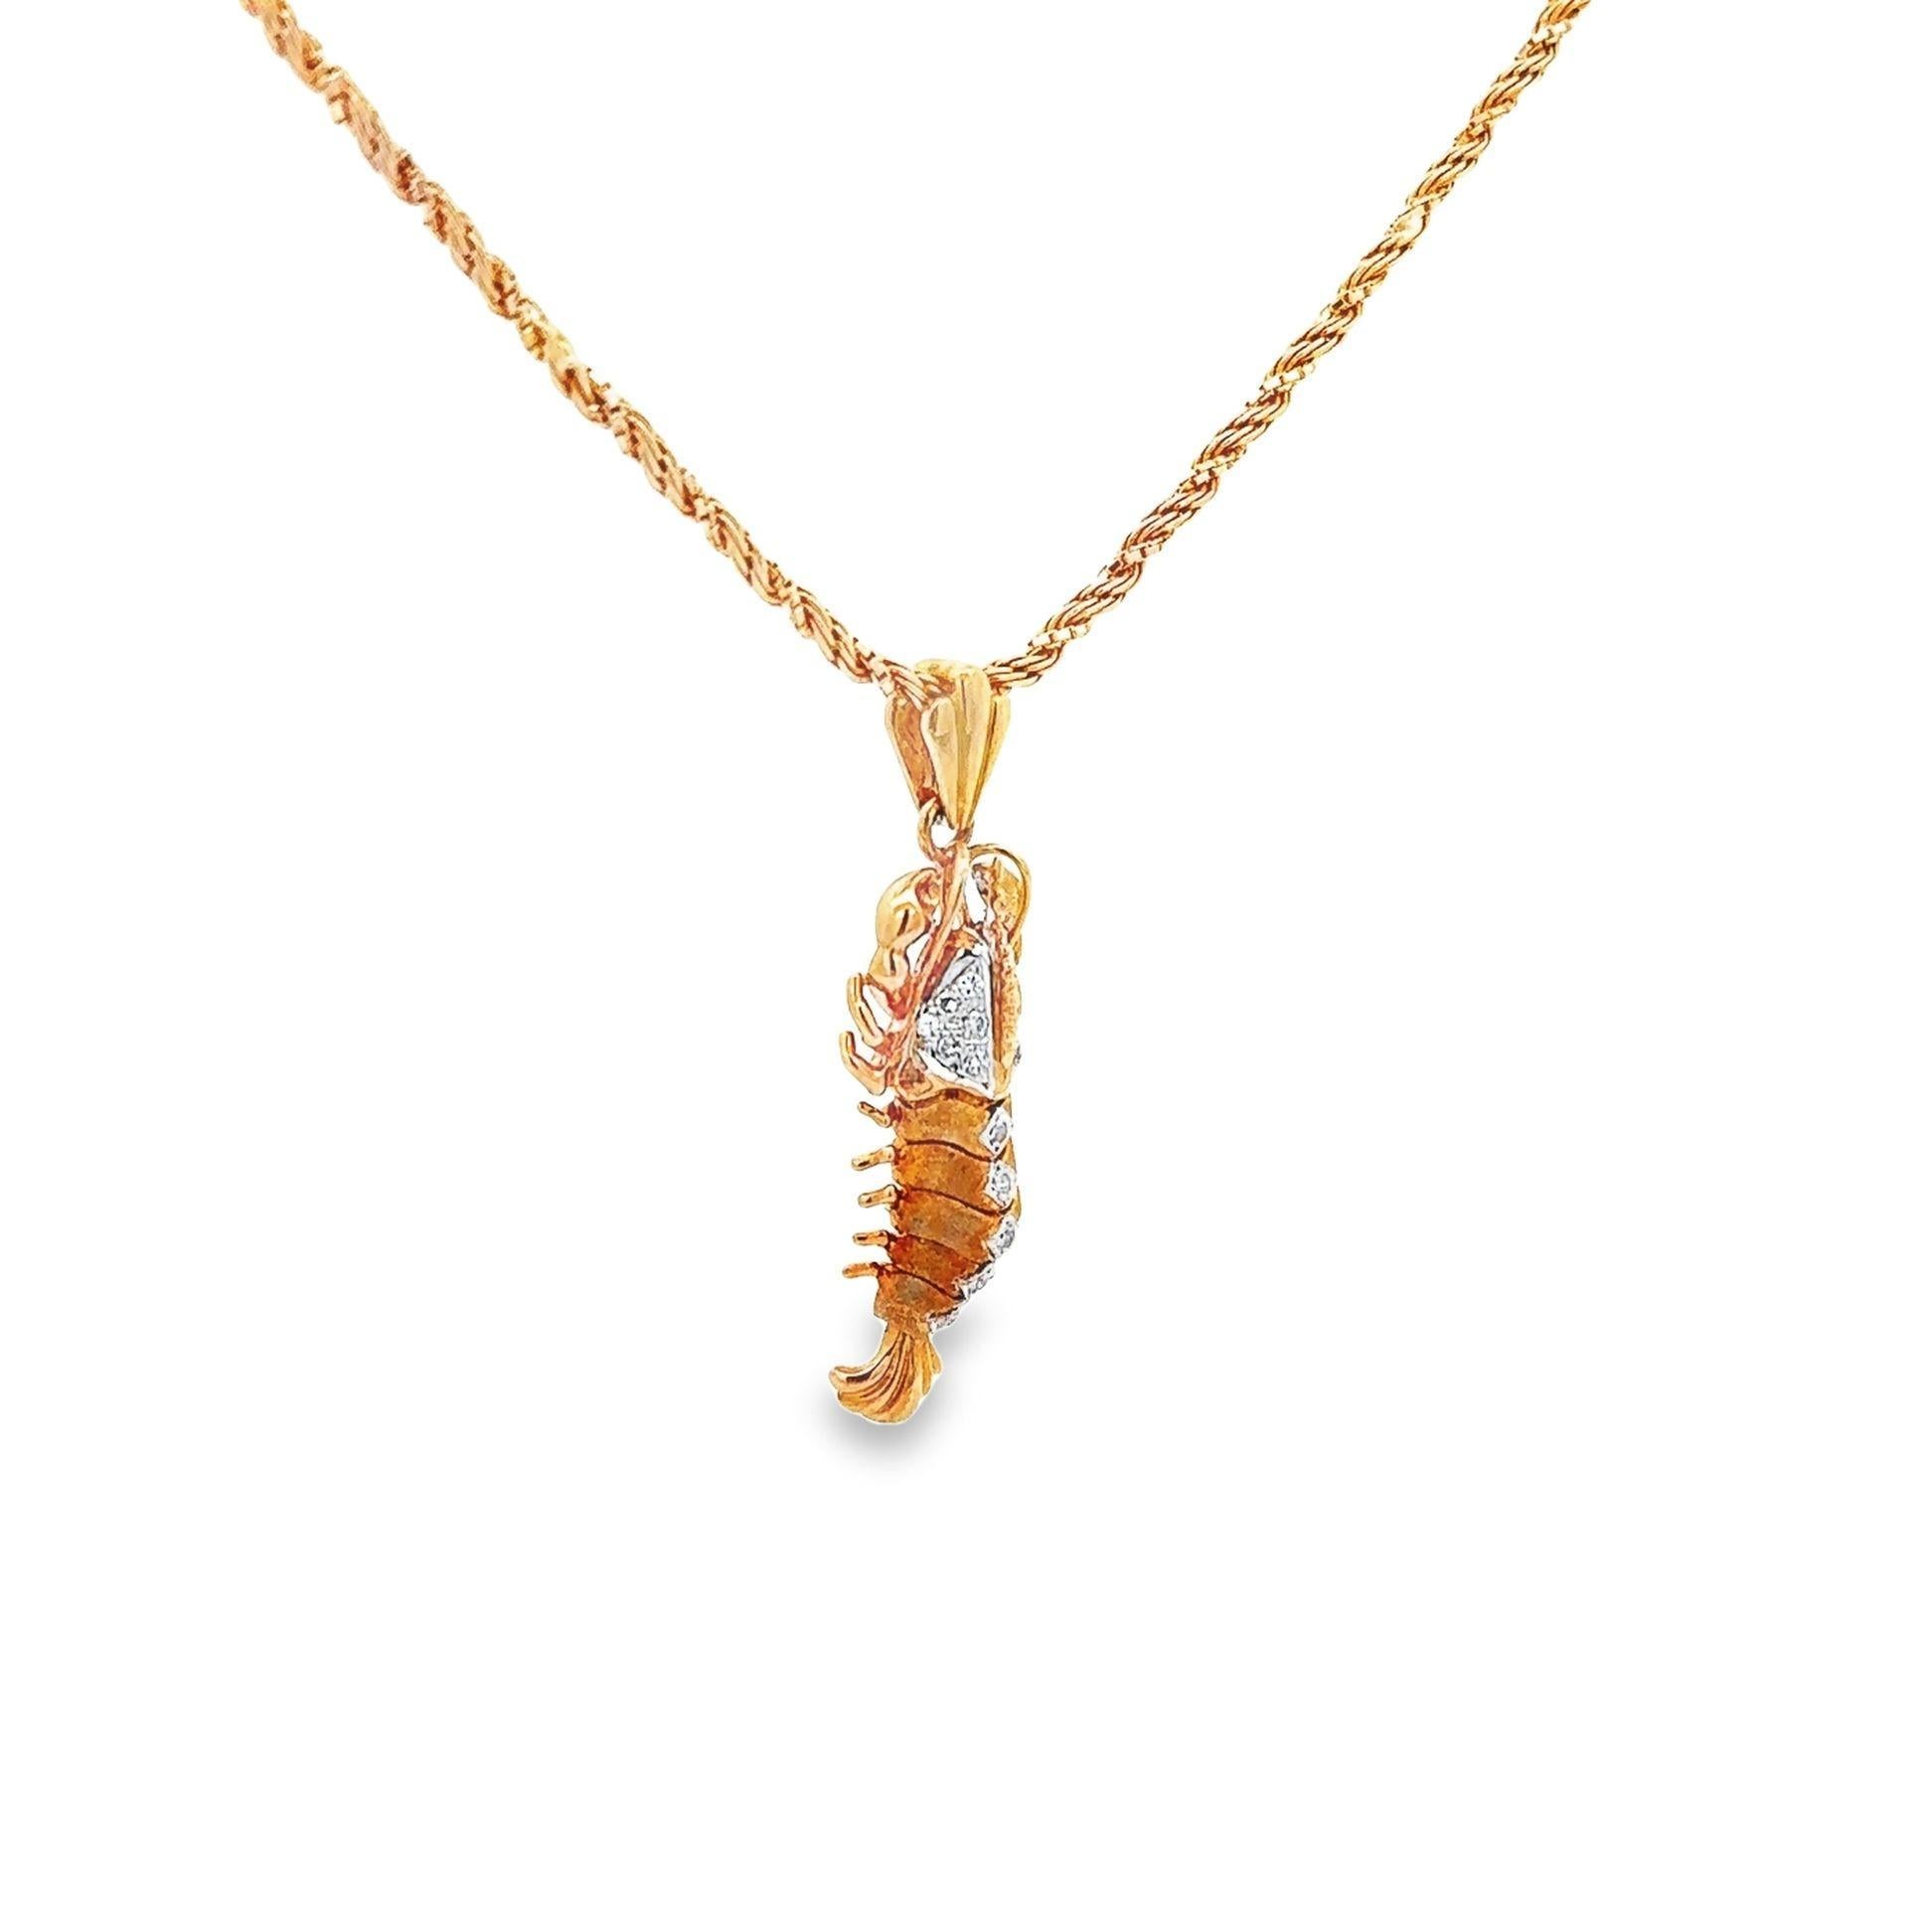 Unleash your bold and daring style with this spectacular lobster pendant, a statement piece that will inspire others. The lobster is meticulously crafted from 18k yellow gold with the addition of 0.17 carats round brilliant-cut diamonds on the body